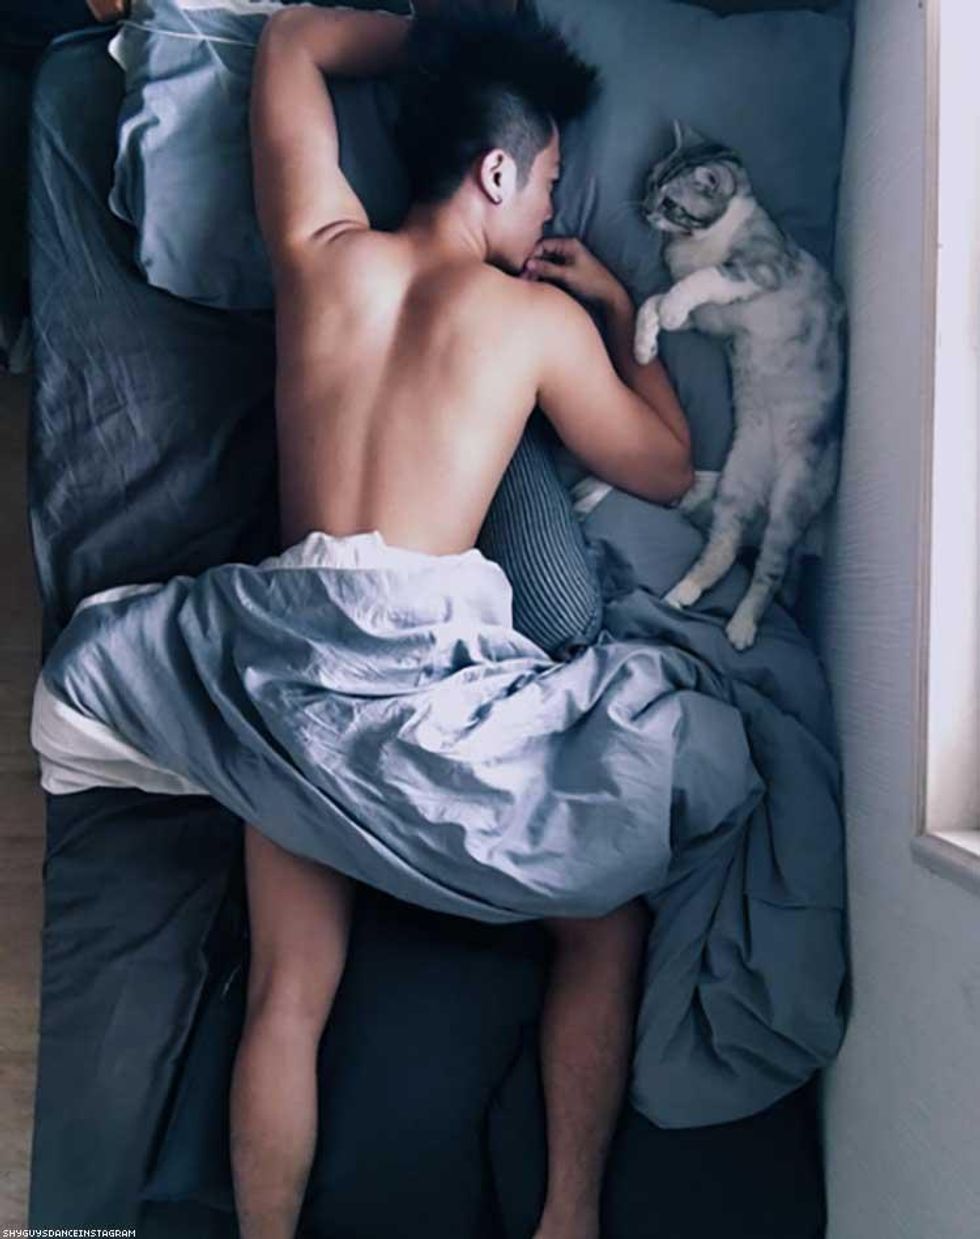 men with cats